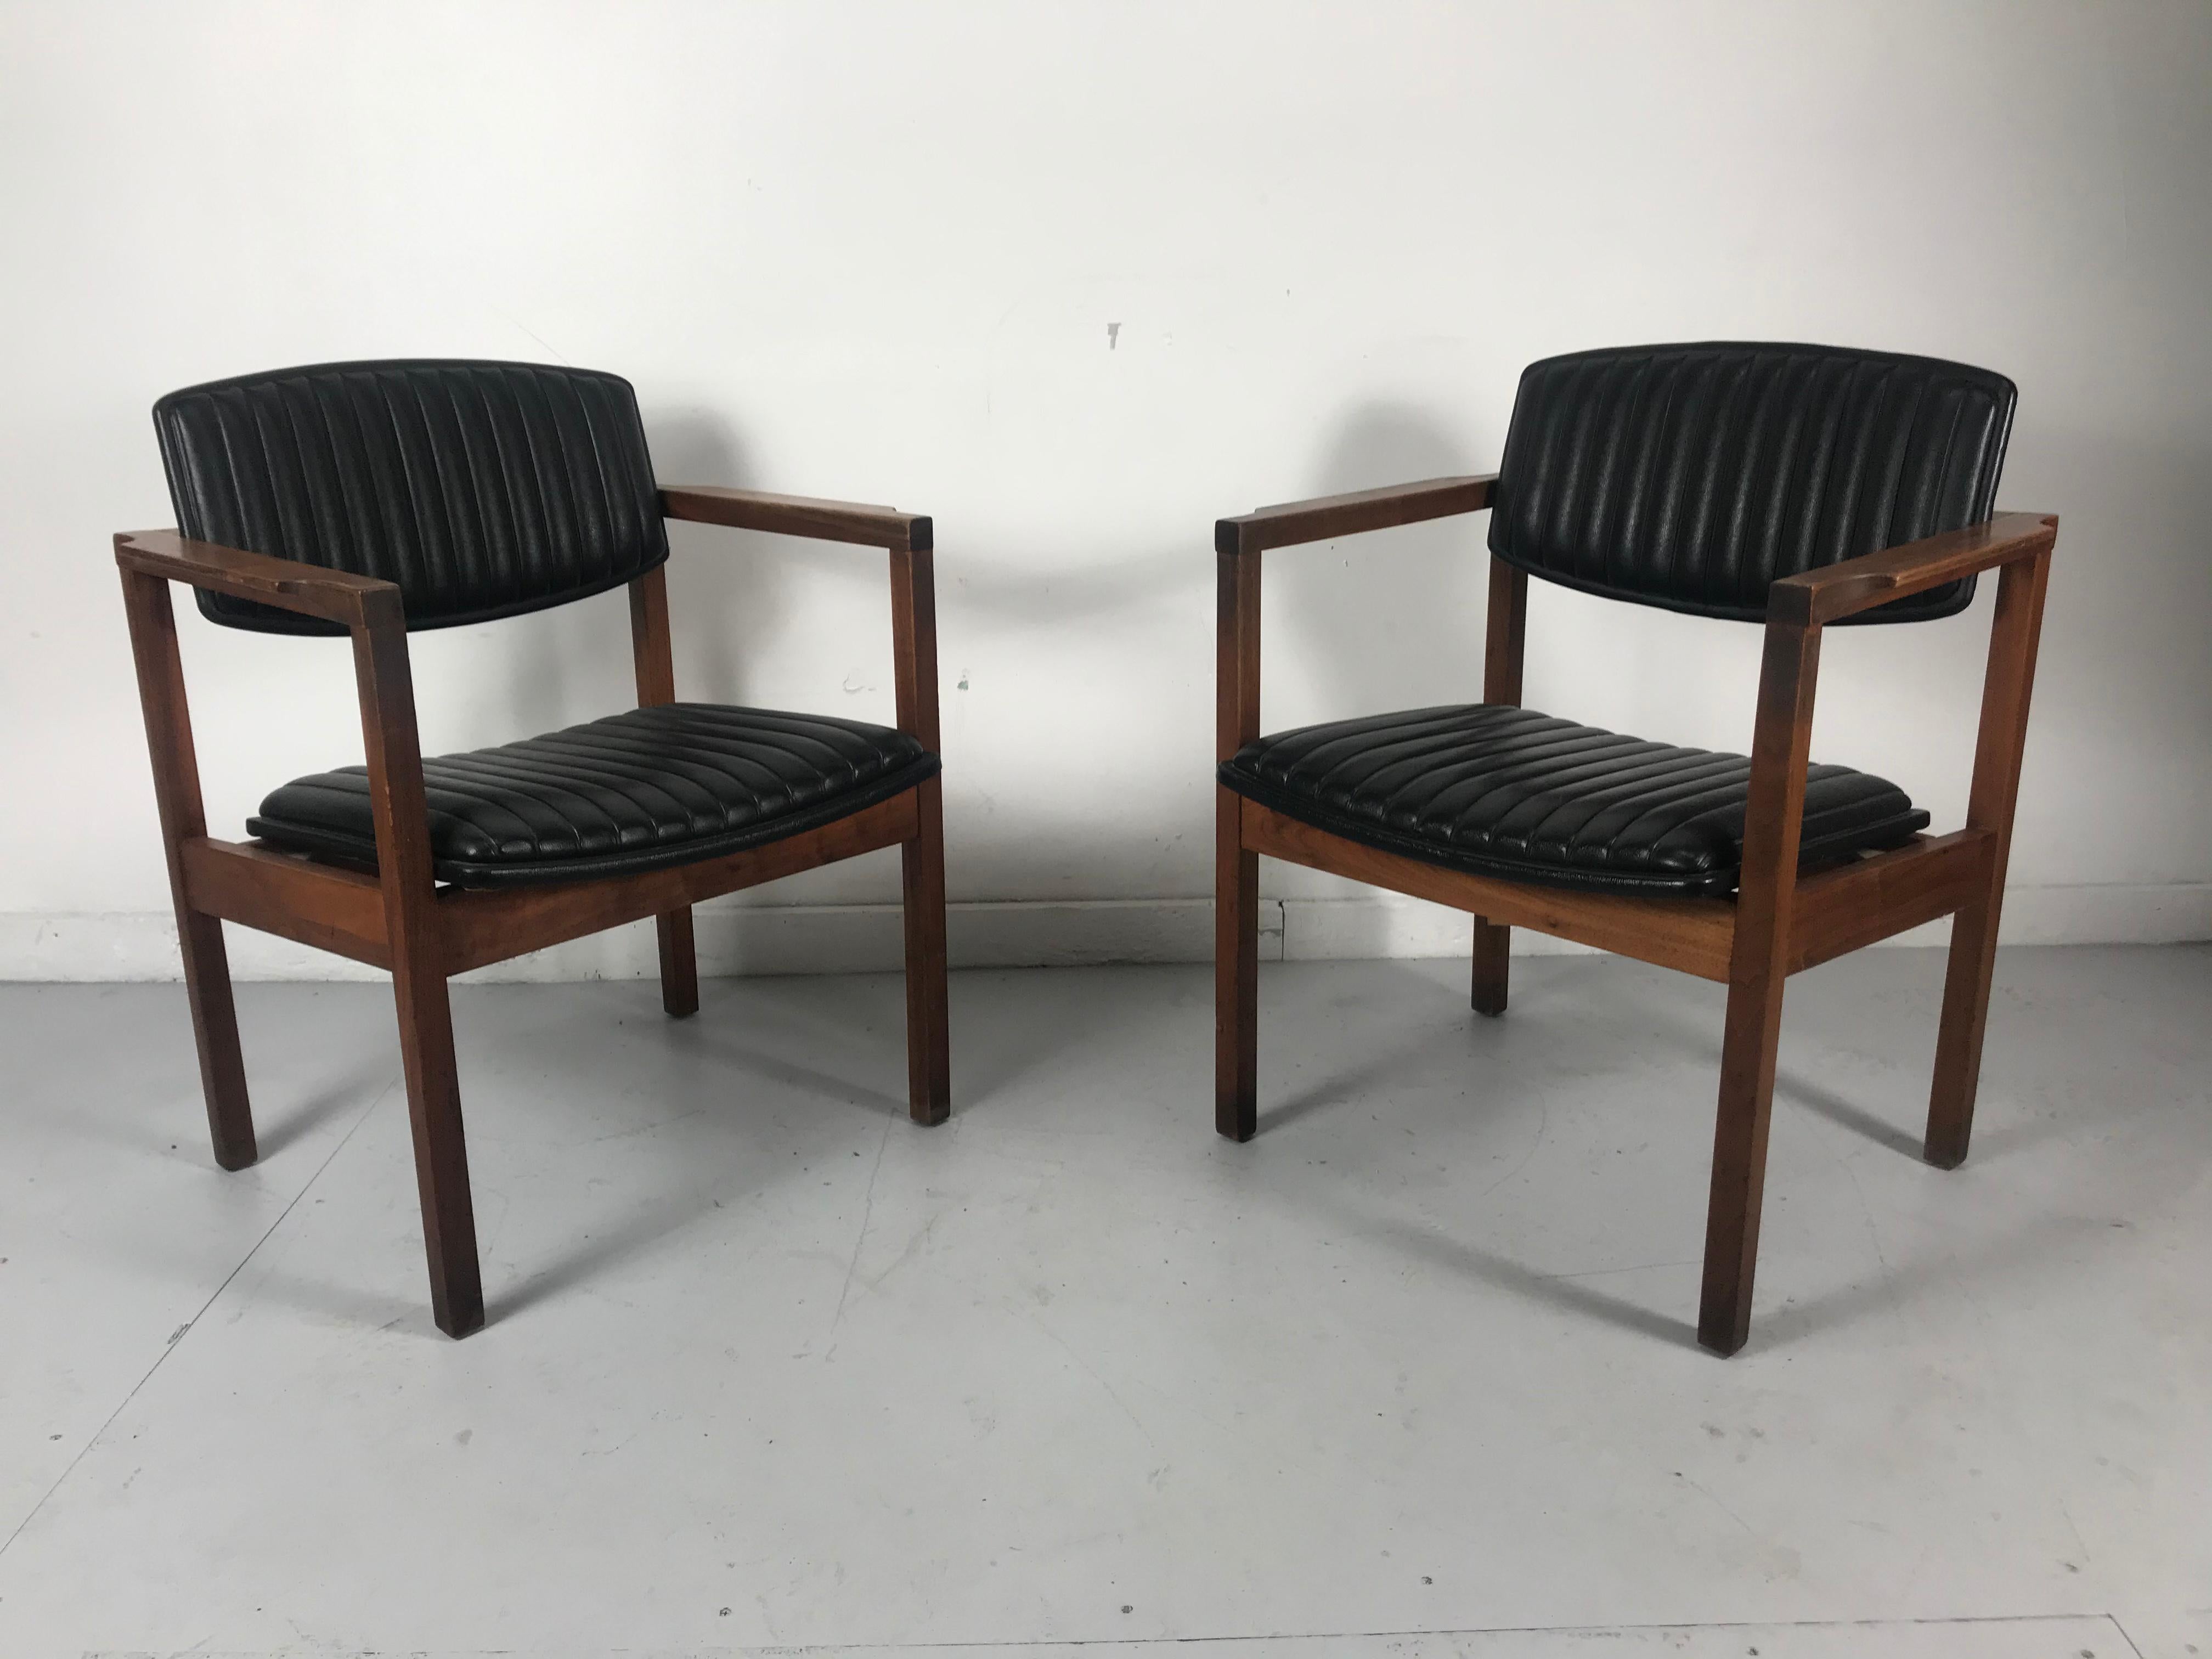 Pair Modernist Walnut and Channeled Naugahyde Lounge Chairs Attr. to Jens Risom In Good Condition For Sale In Buffalo, NY